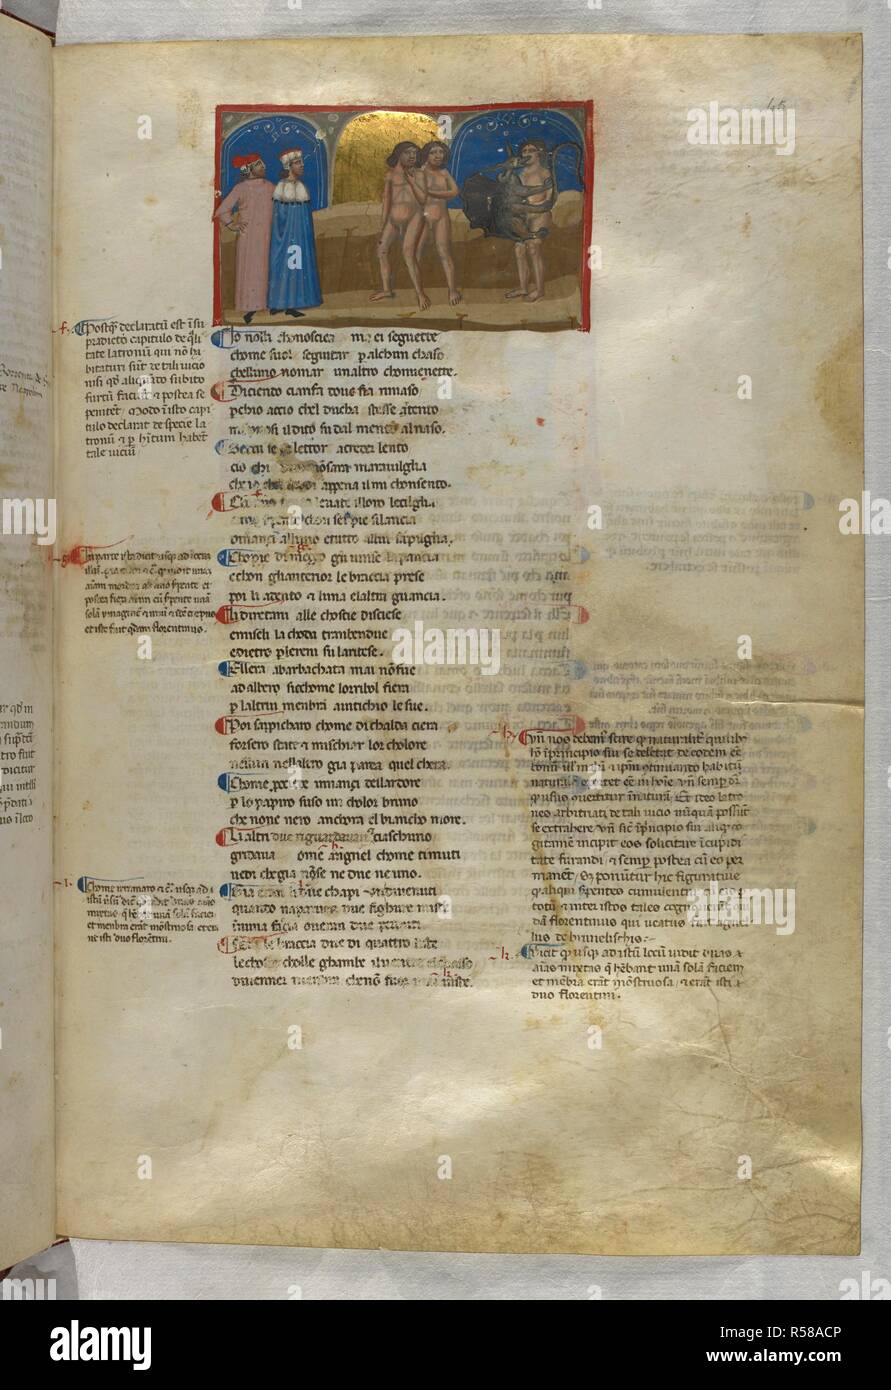 Inferno: A sinner is attacked by a dragon. Dante Alighieri, Divina Commedia ( The Divine Comedy ), with a commentary in Latin. 1st half of the 14th century. Source: Egerton 943, f.45. Language: Italian, Latin. Stock Photo